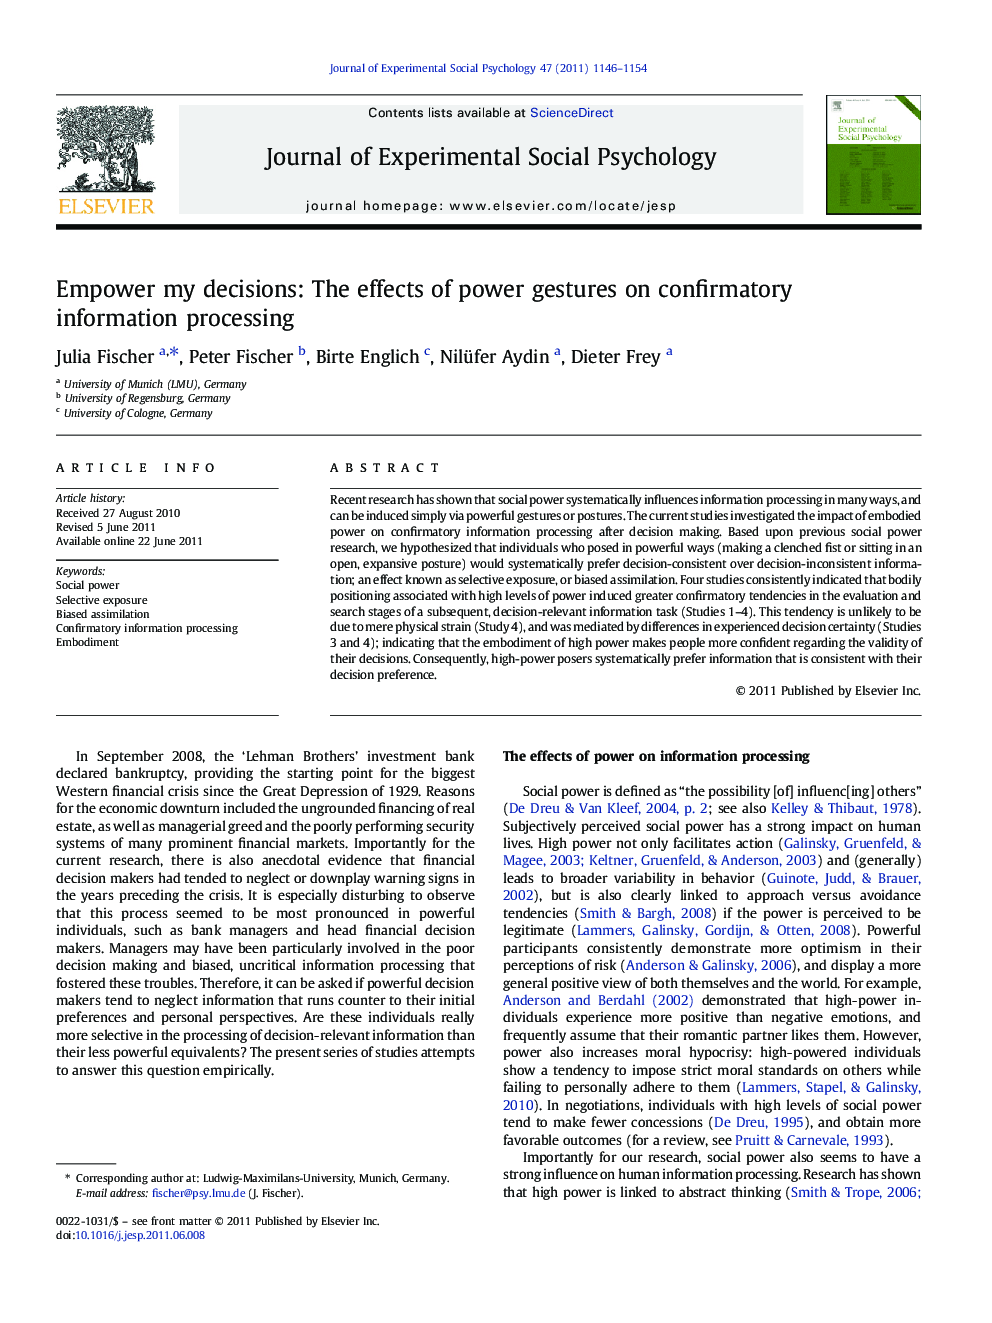 Empower my decisions: The effects of power gestures on confirmatory information processing